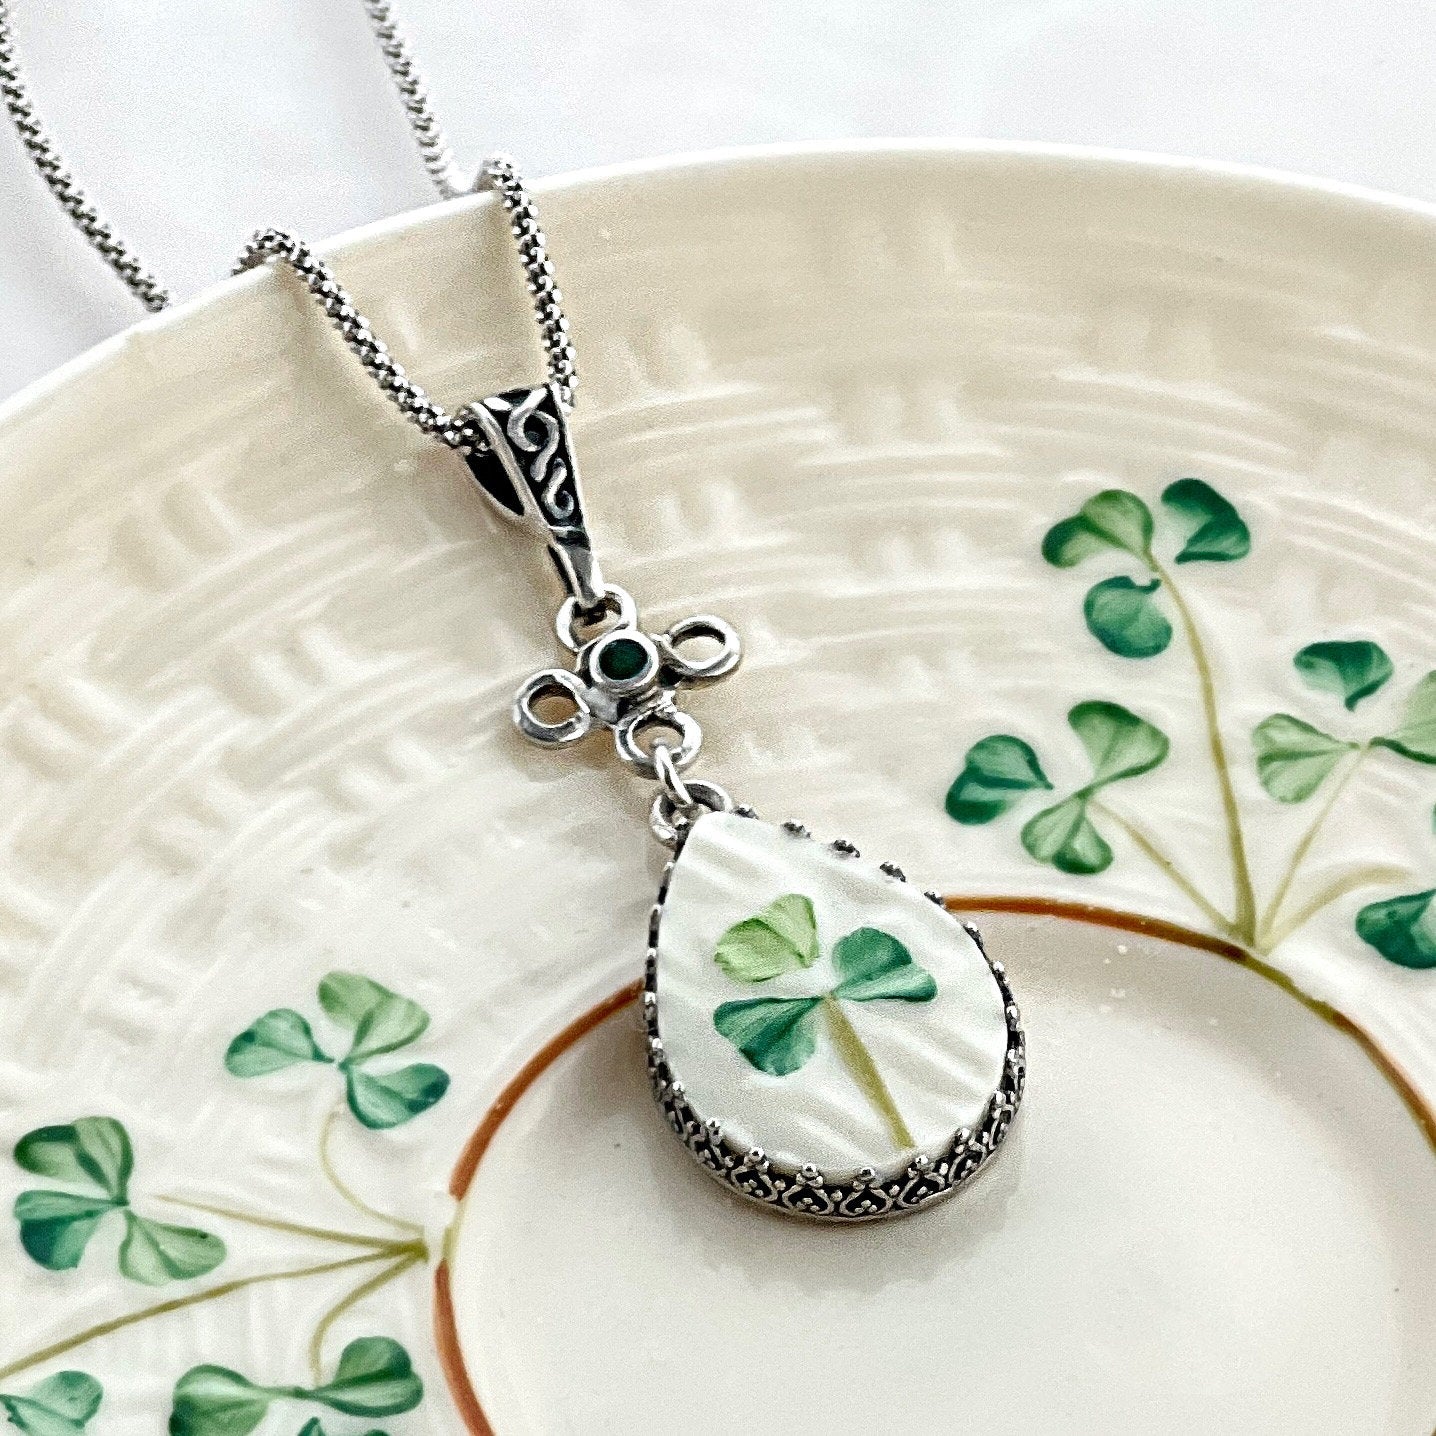 Belleek Irish China Necklace, Sterling Silver Celtic Knot, Broken China Jewelry, Unique 20th Anniversary Gift for Wife, Irish Jewelry Gift